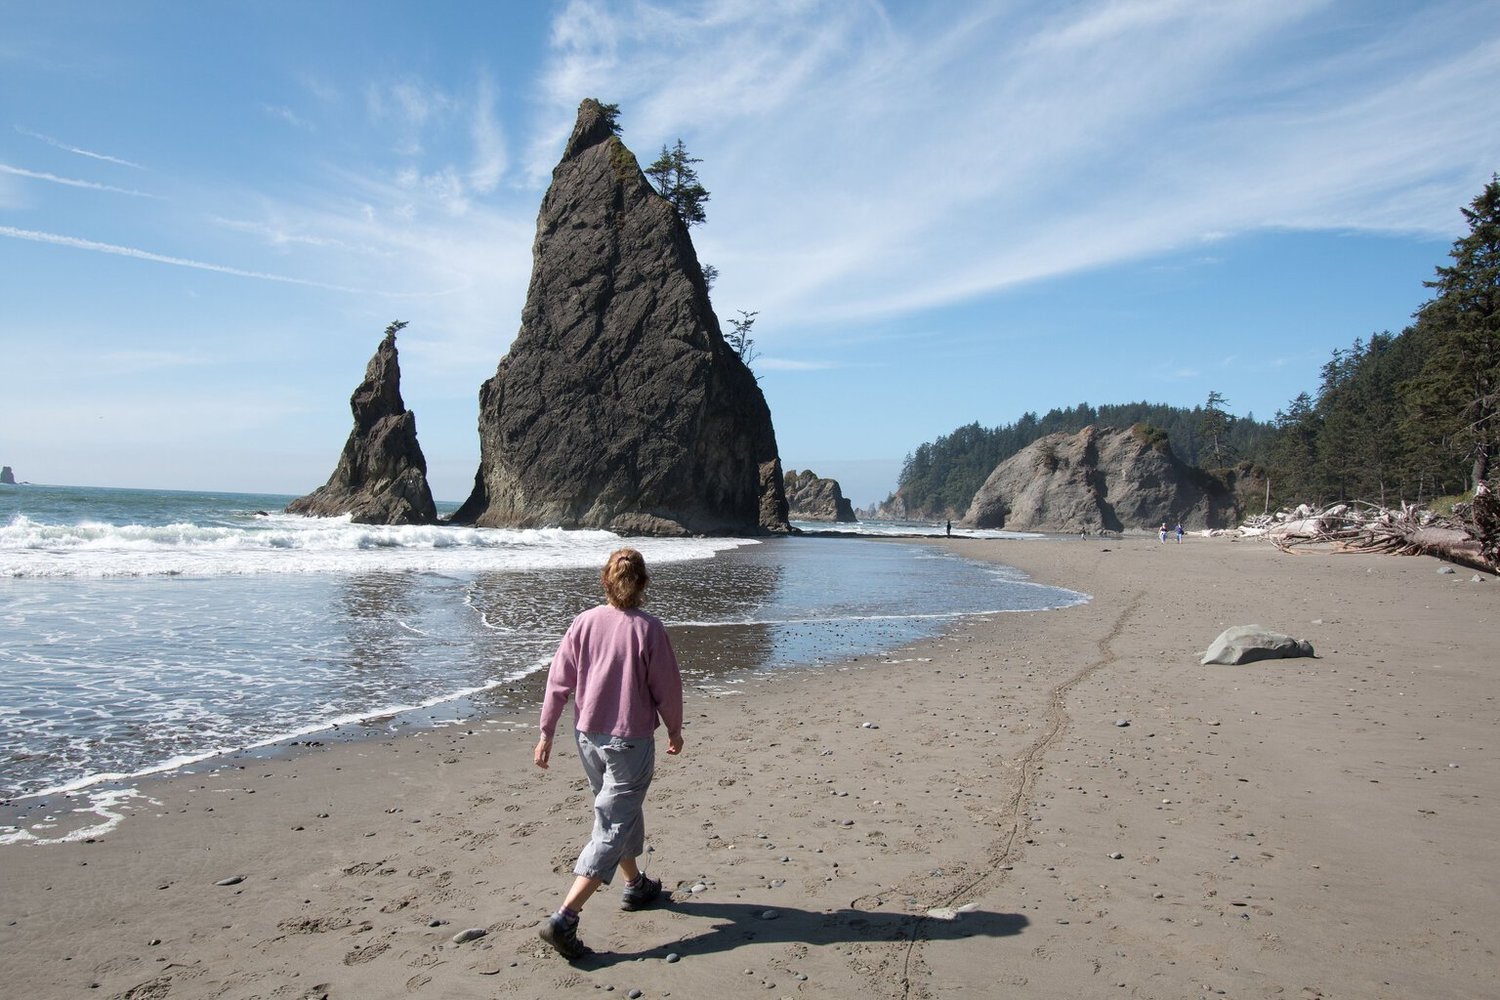 Rialto Beach and its famous sea stacks is a must-see, among the best and easiest spots to get to among many on the Pacific Coast strip of Olympic National Park.